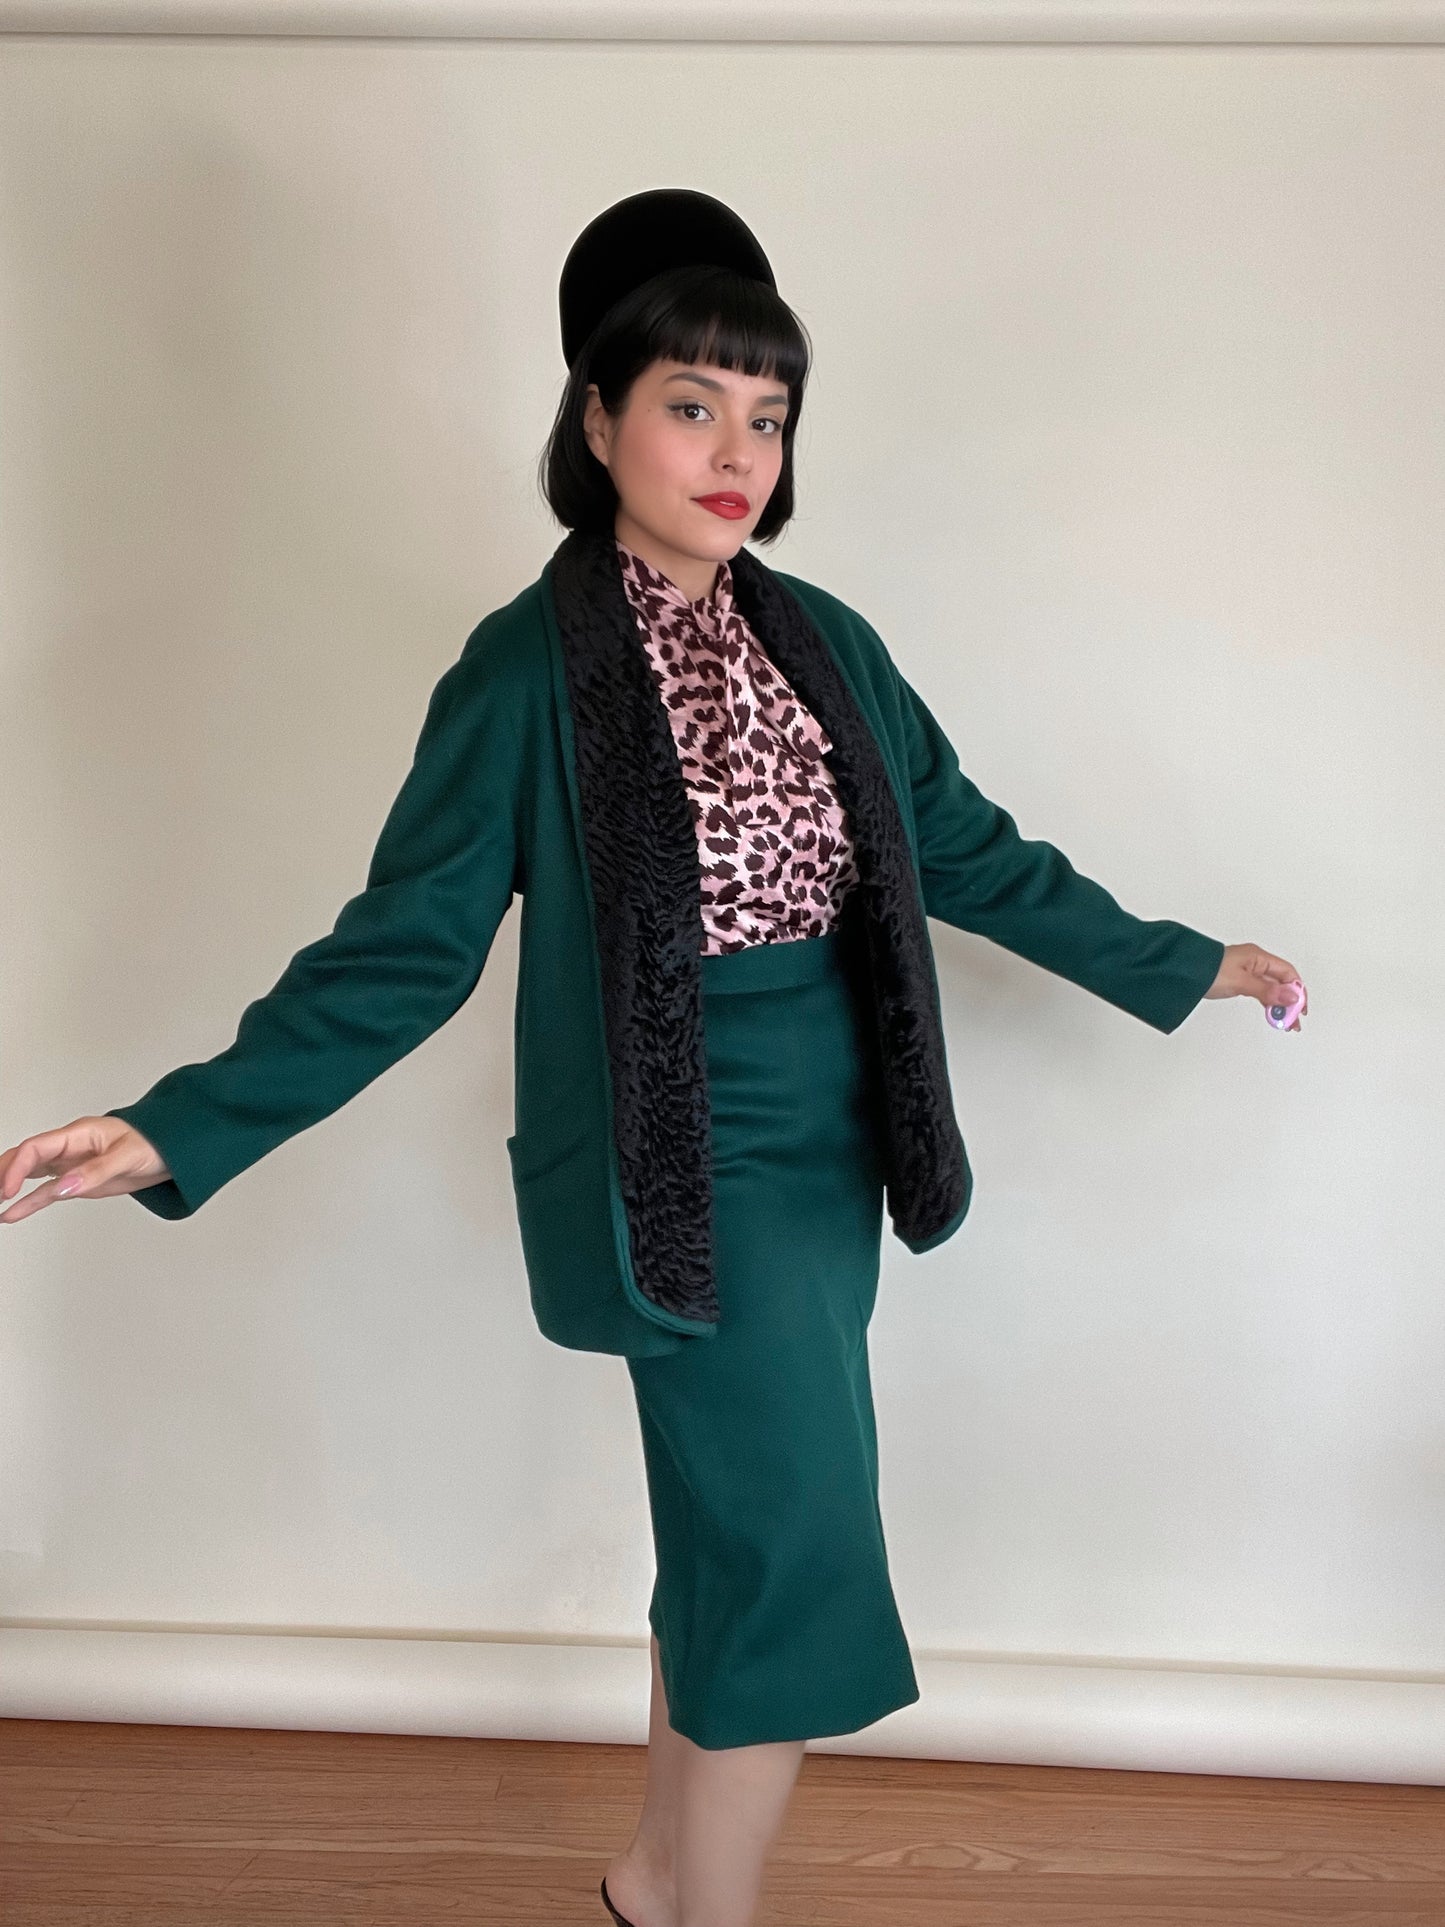 Vintage 50s / 60s "Townley" Forest Green Swing Coat Matching High Waisted Skirt Set Best Fits Sizes S-M